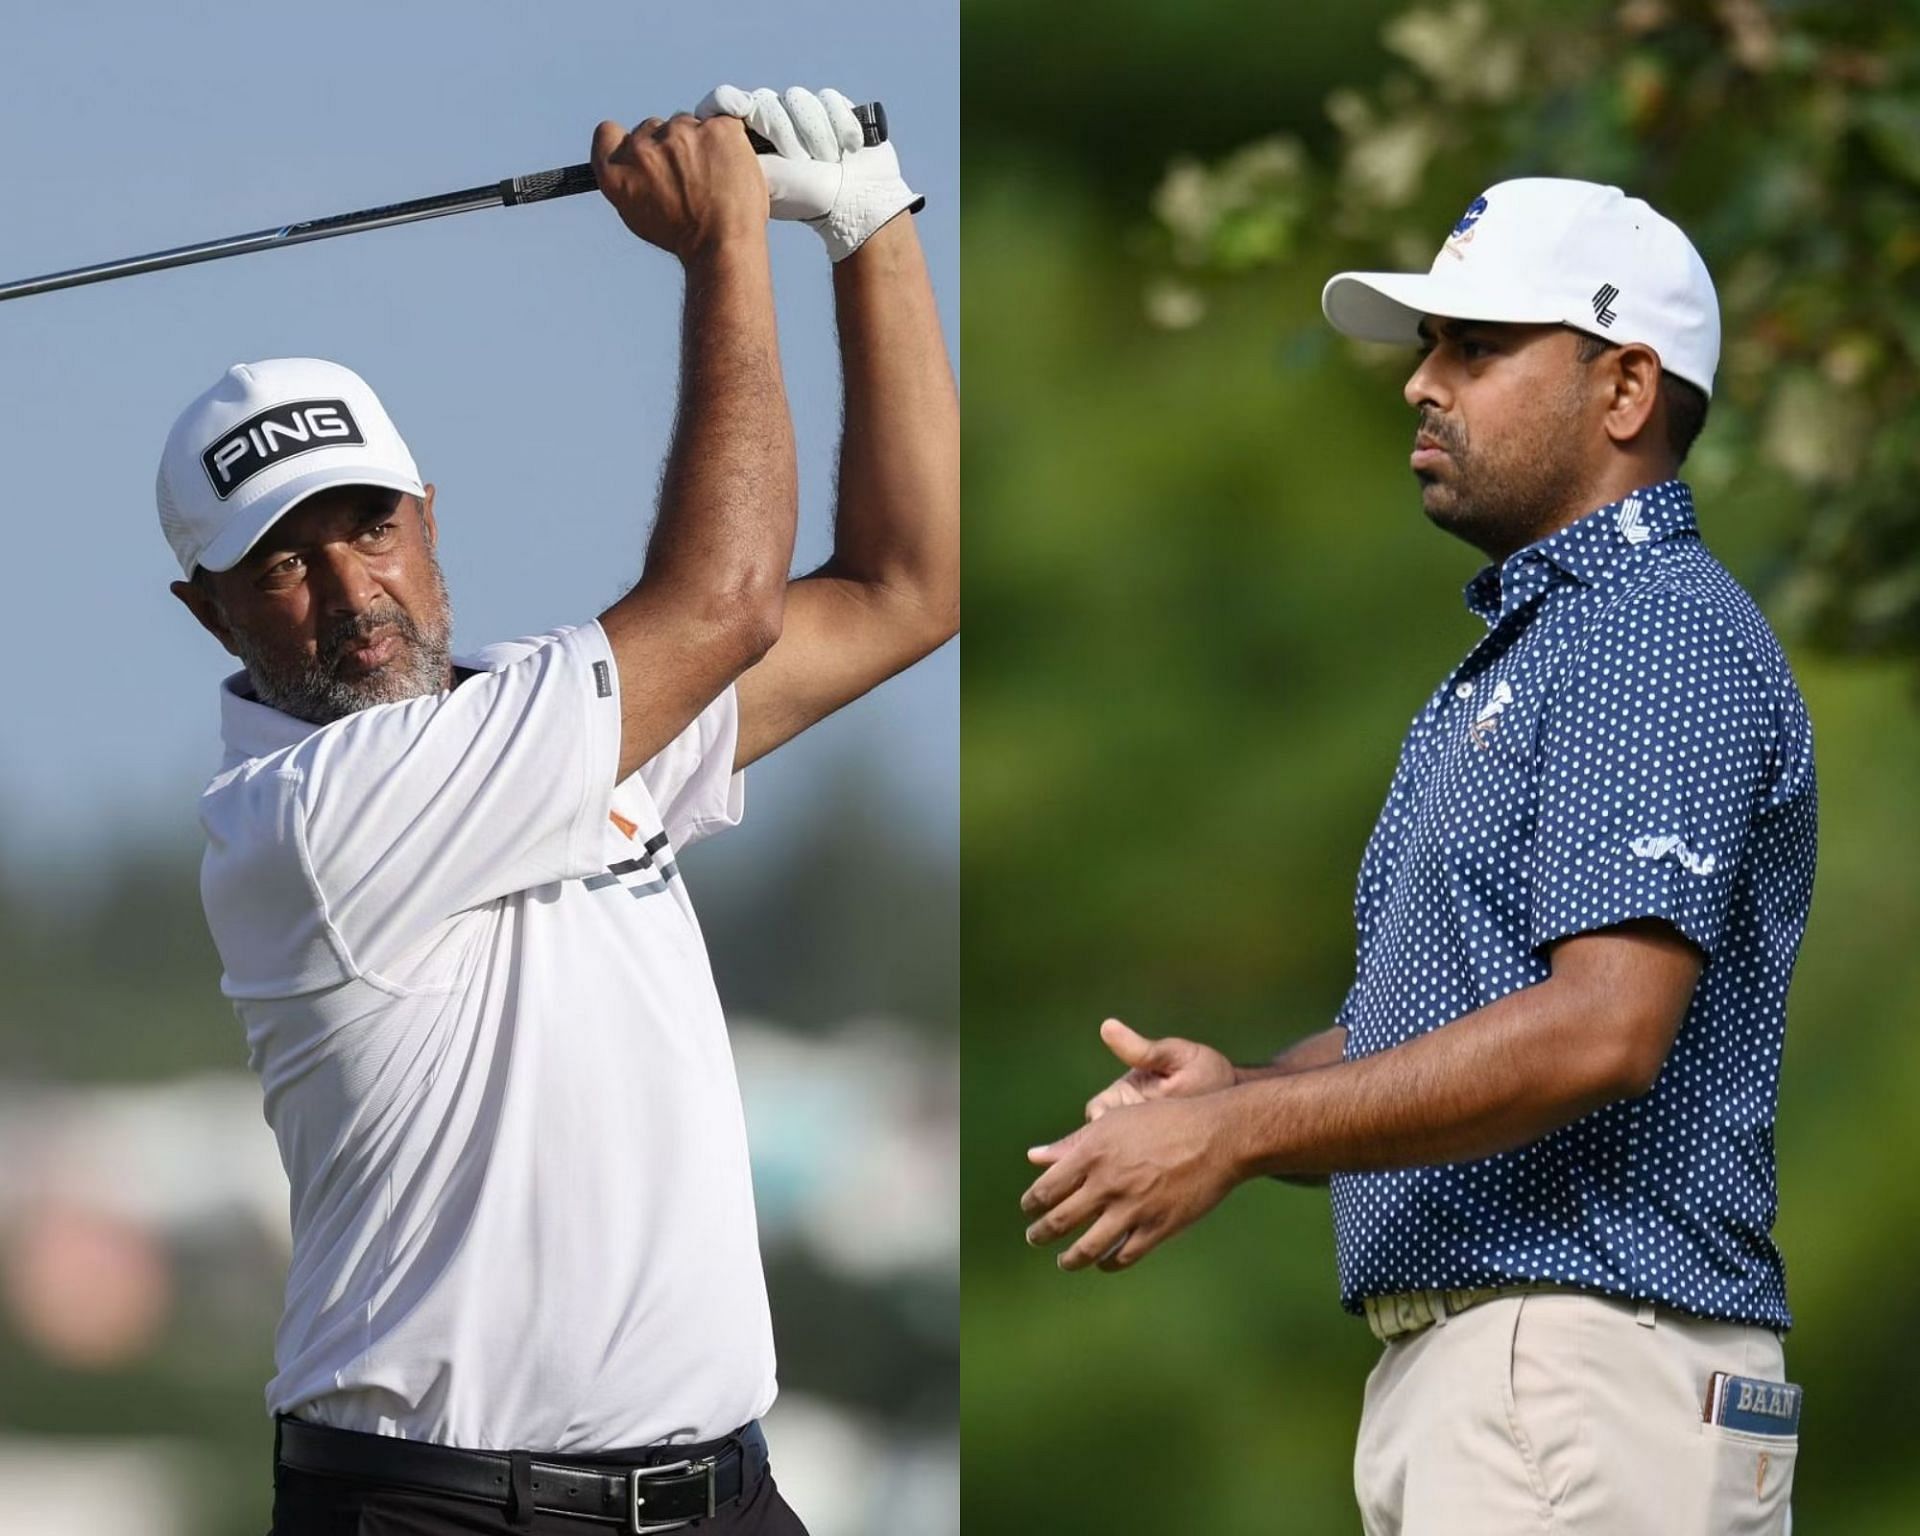 Arjun Atwal (left) and Anirban Lahiri (right) - Image via Getty Images